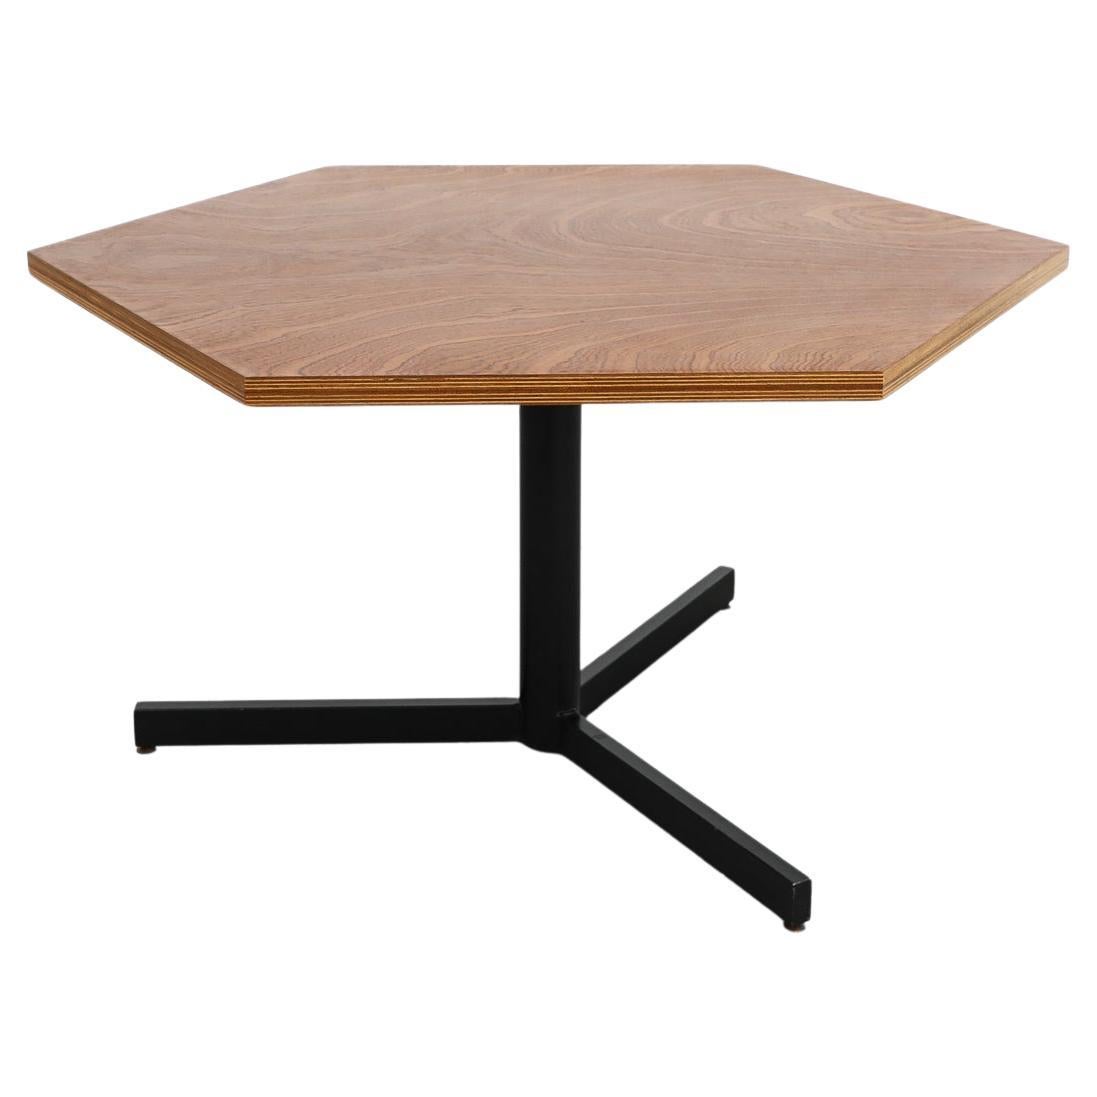 Martin Visser Inspired Hexagon Pedestal Table with Walnut Top and Black Base For Sale